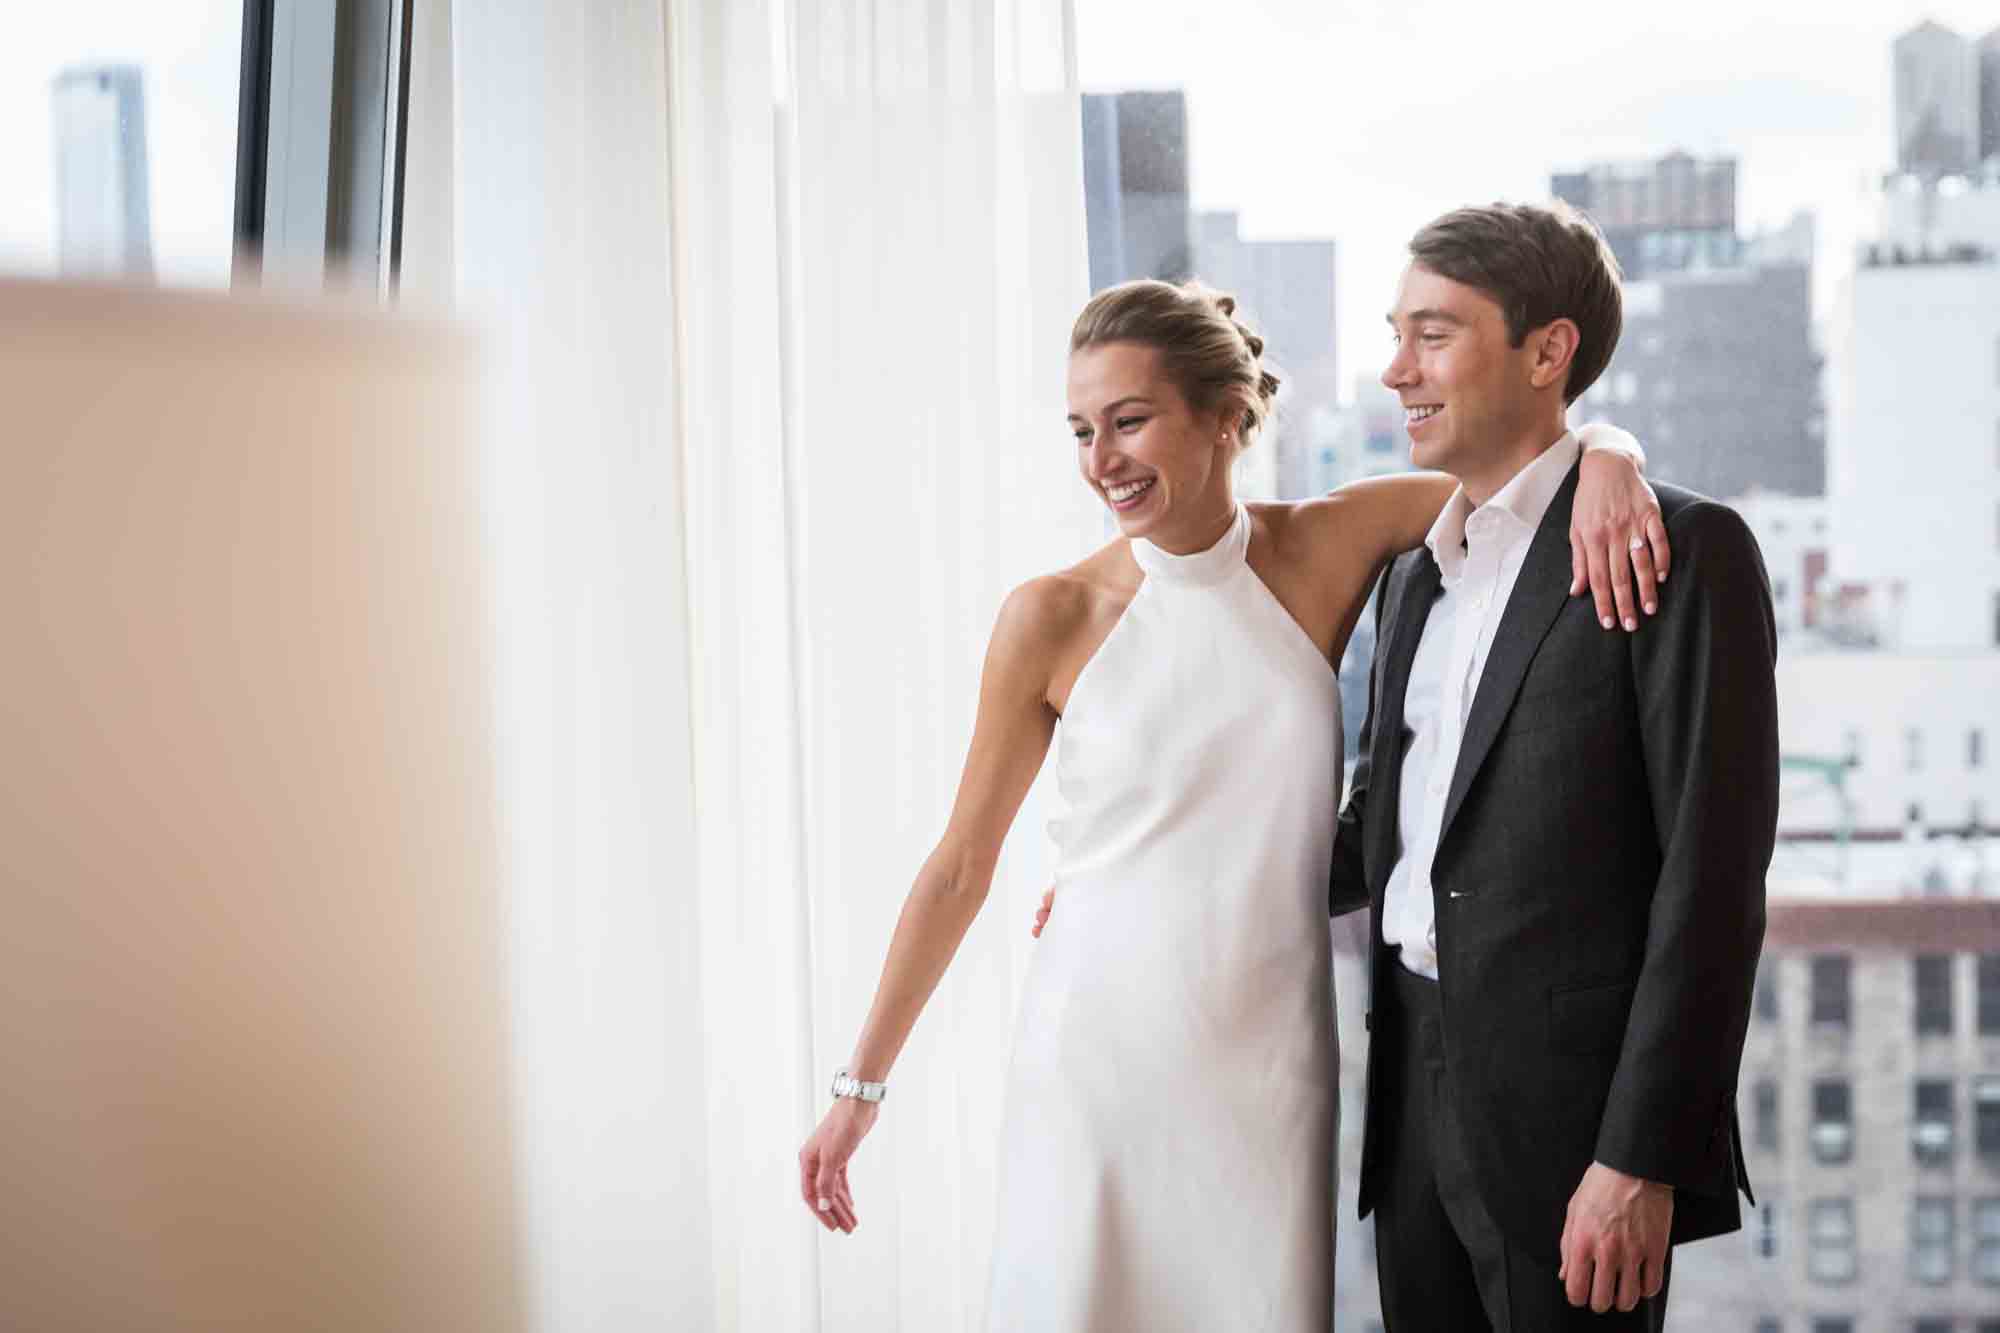 Bride and groom in front of white curtain before their Public Hotel wedding